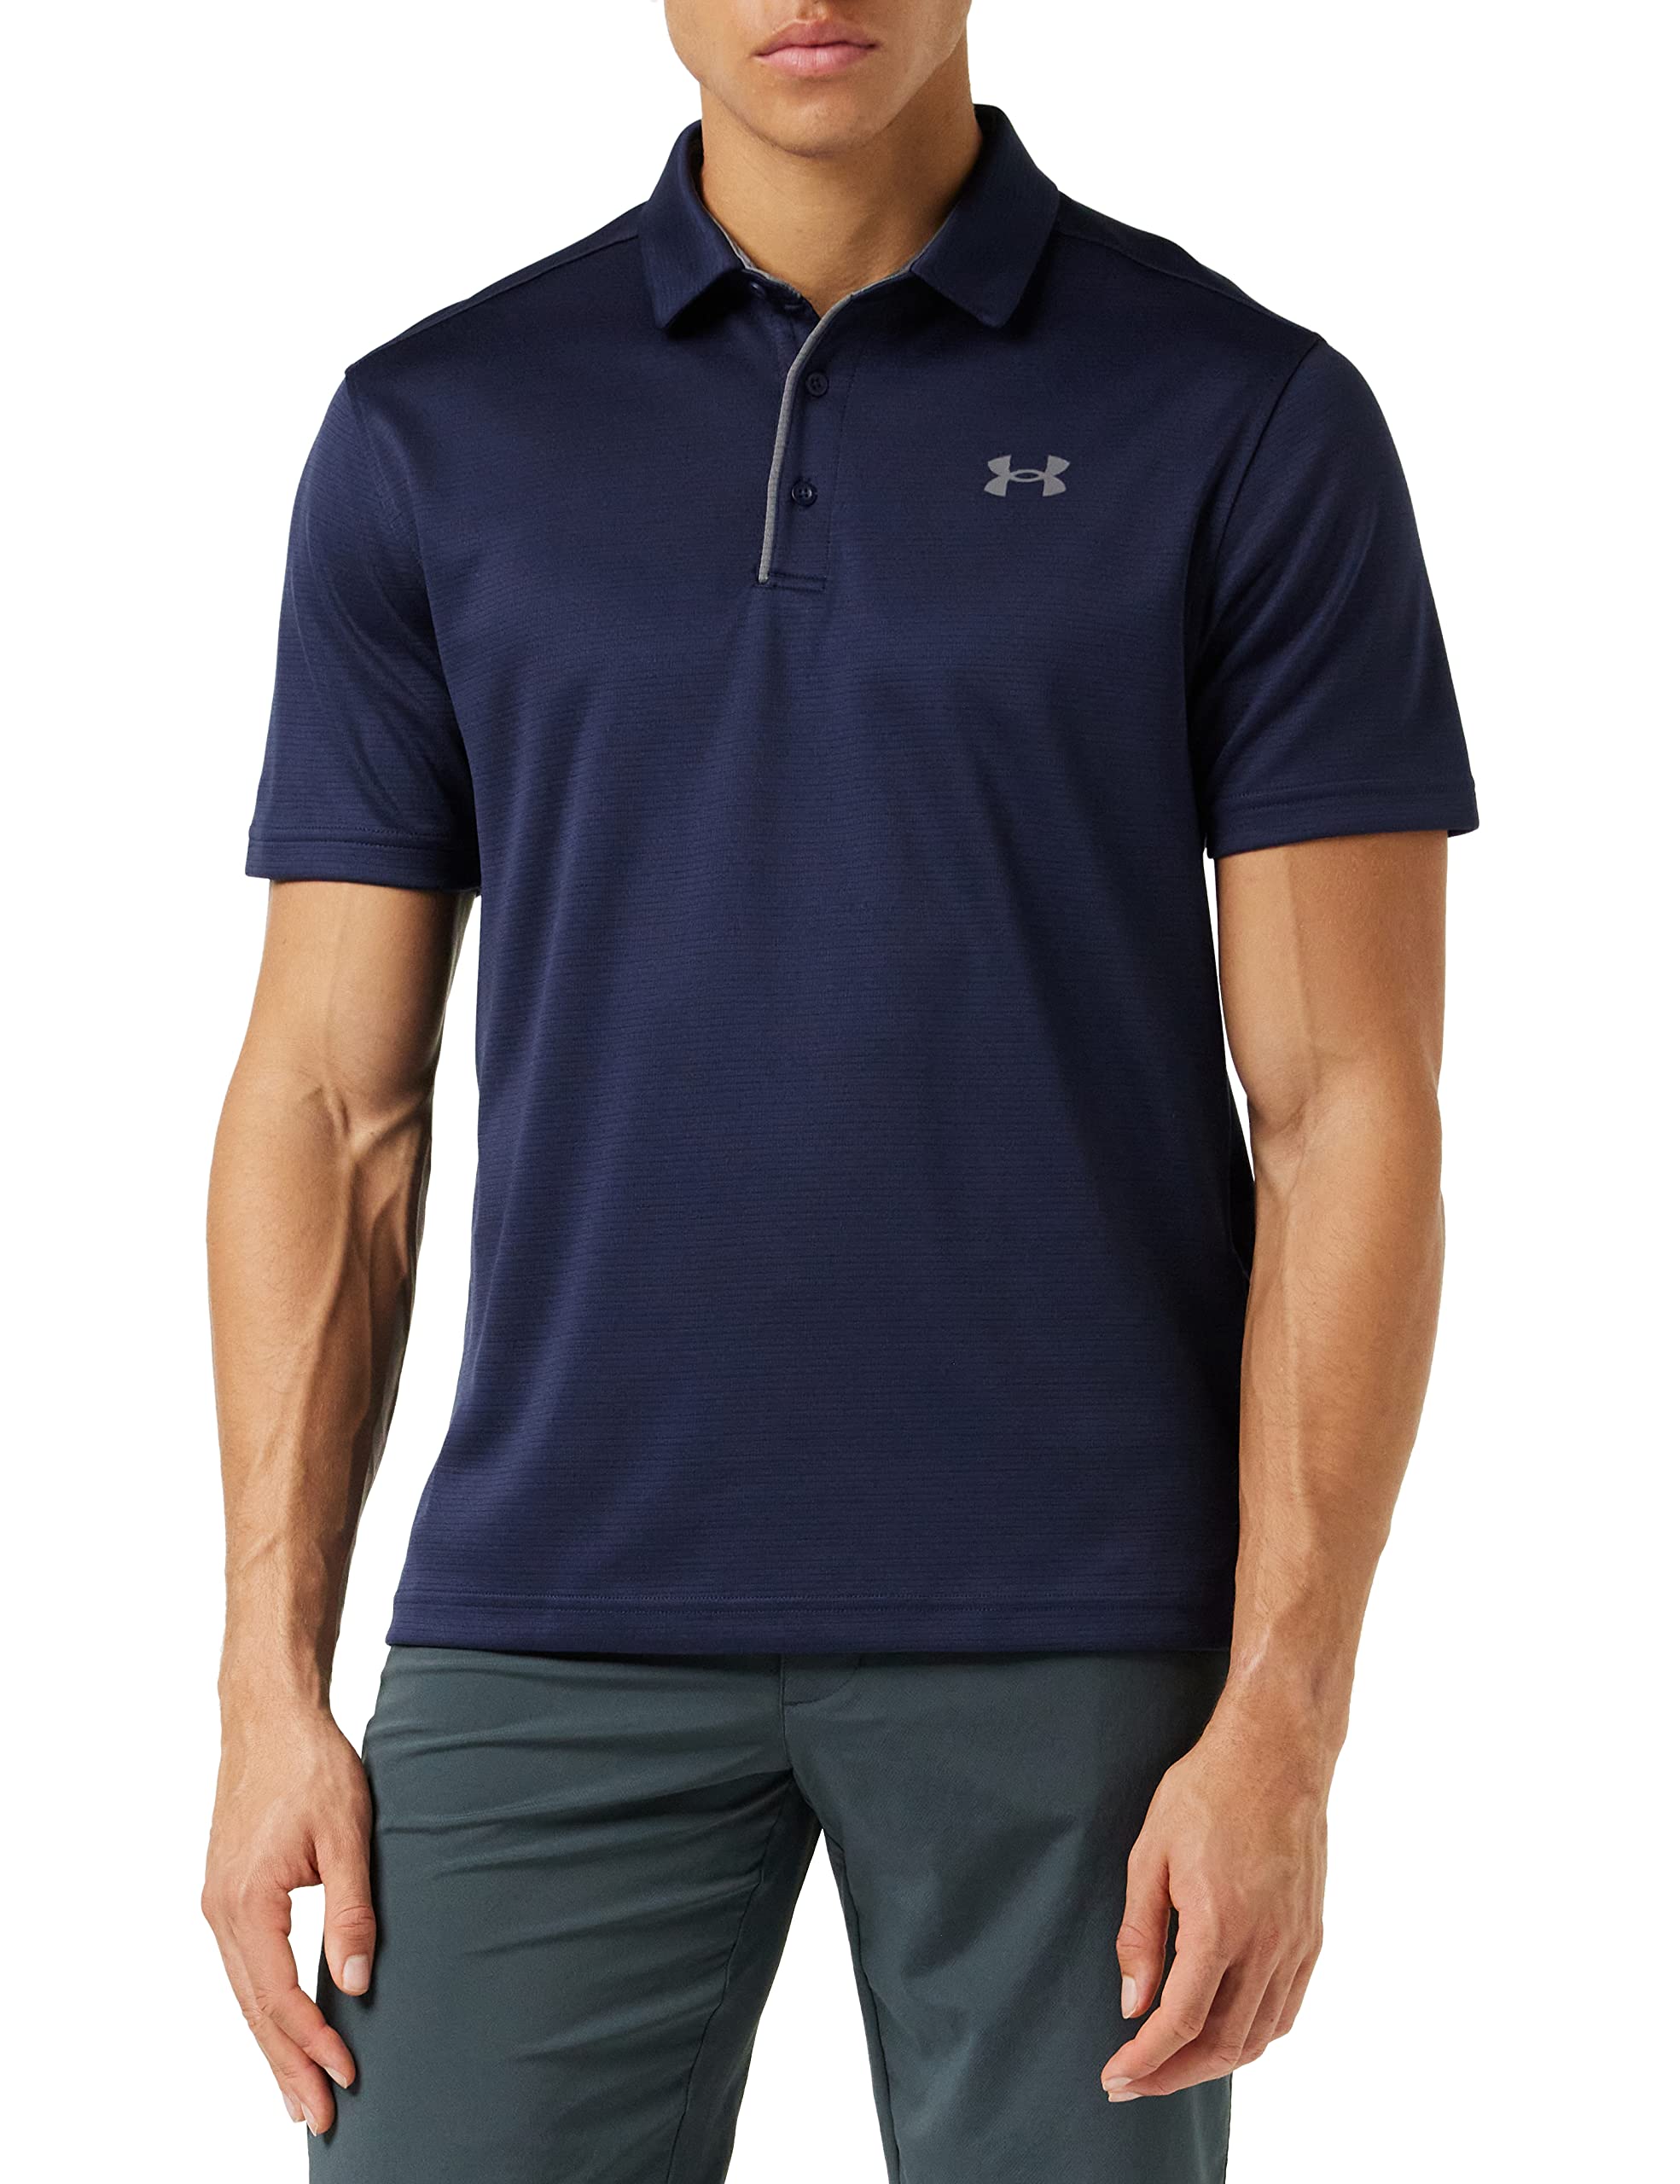 Under Armour Men's Tech Golf Polo: Navy (Sizes Small, XLTall-4XL), Red (XS, XL-3XL), Orange (XLTall) $12 + Free Shipping w/ Prime or on $35+